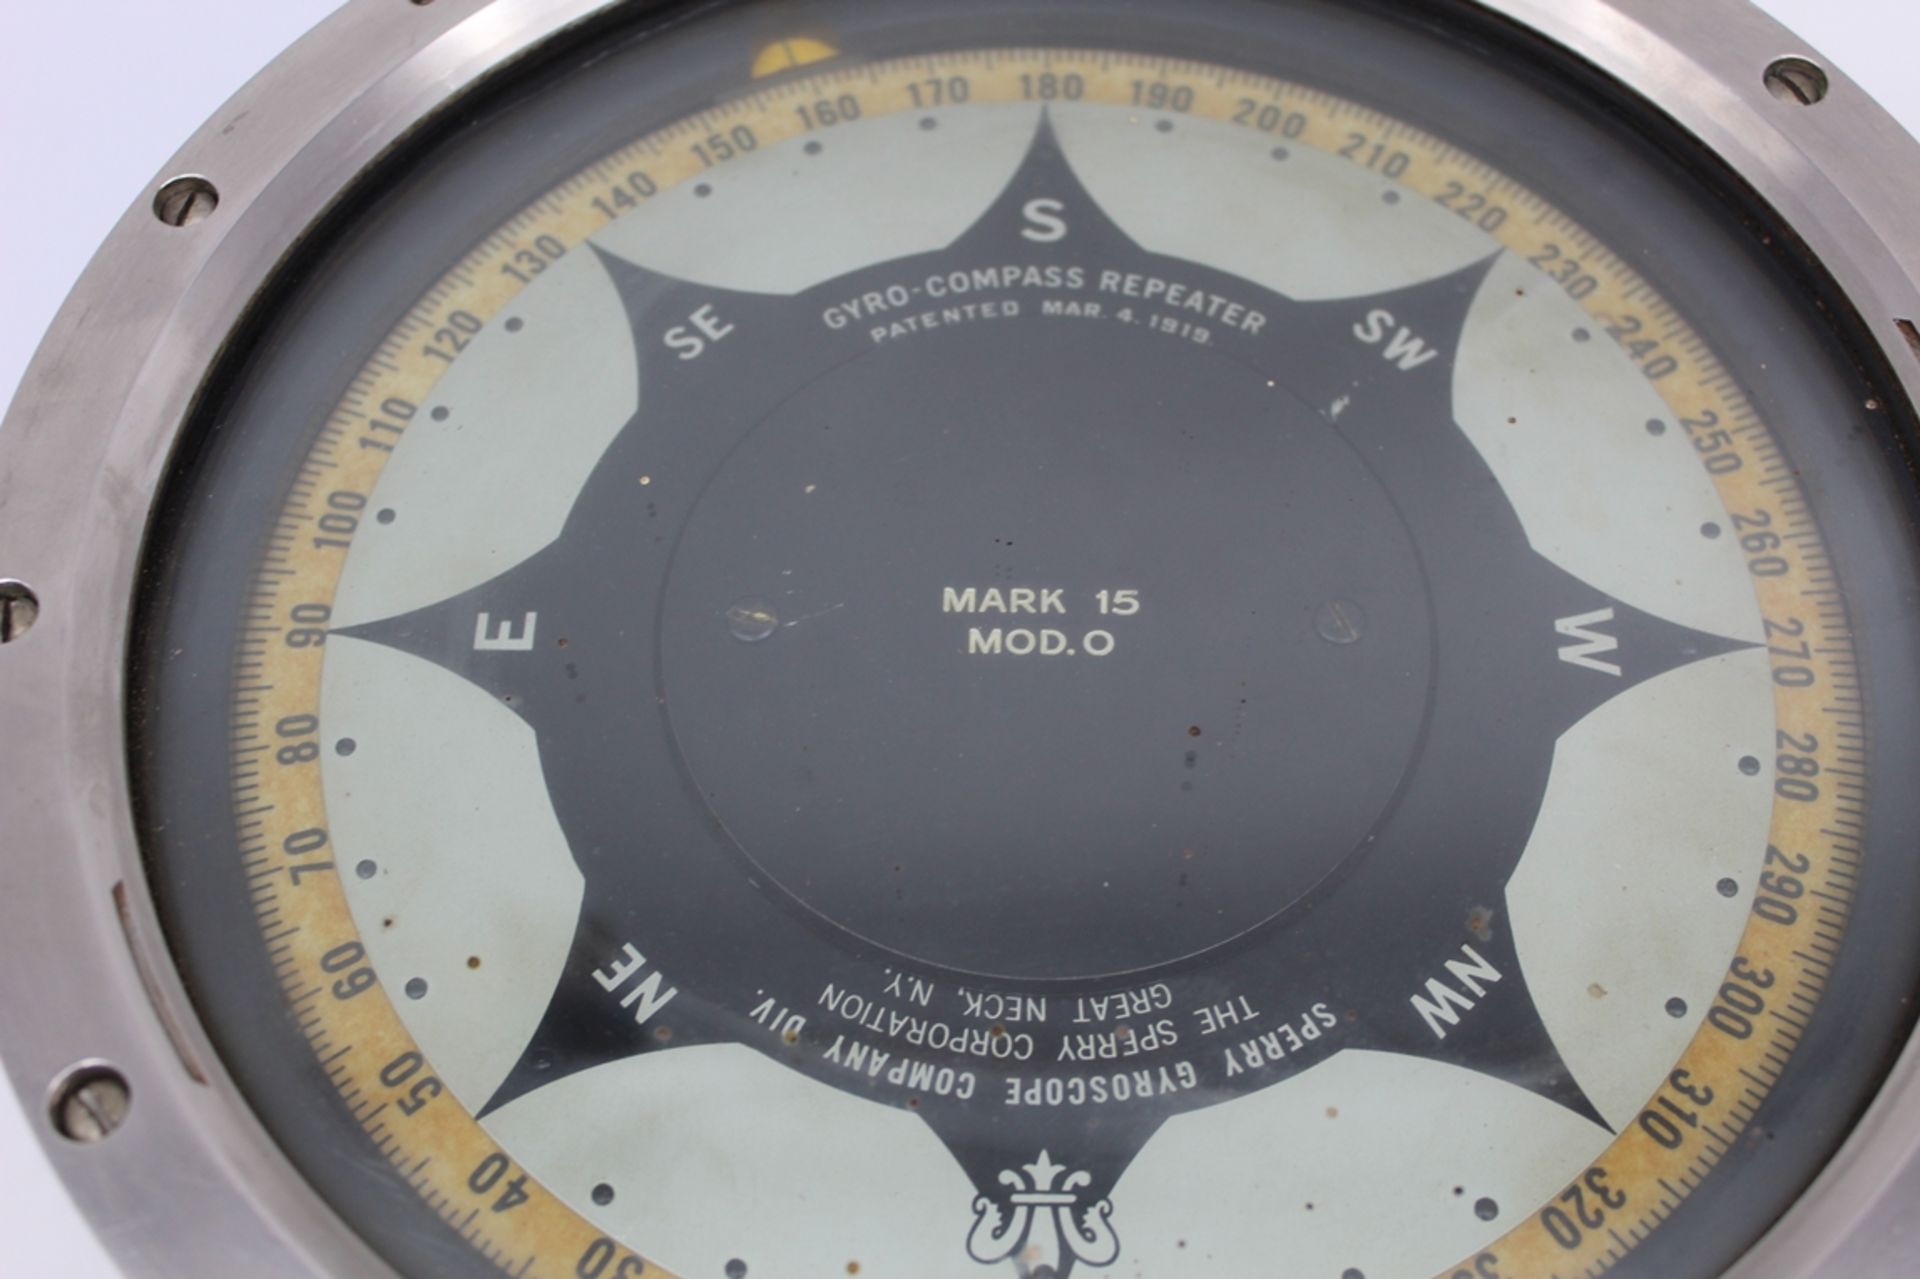 Sperry Gyro Compass Repeater "Mark 15" New York, H-19 cm, D-25 cm - Image 6 of 13